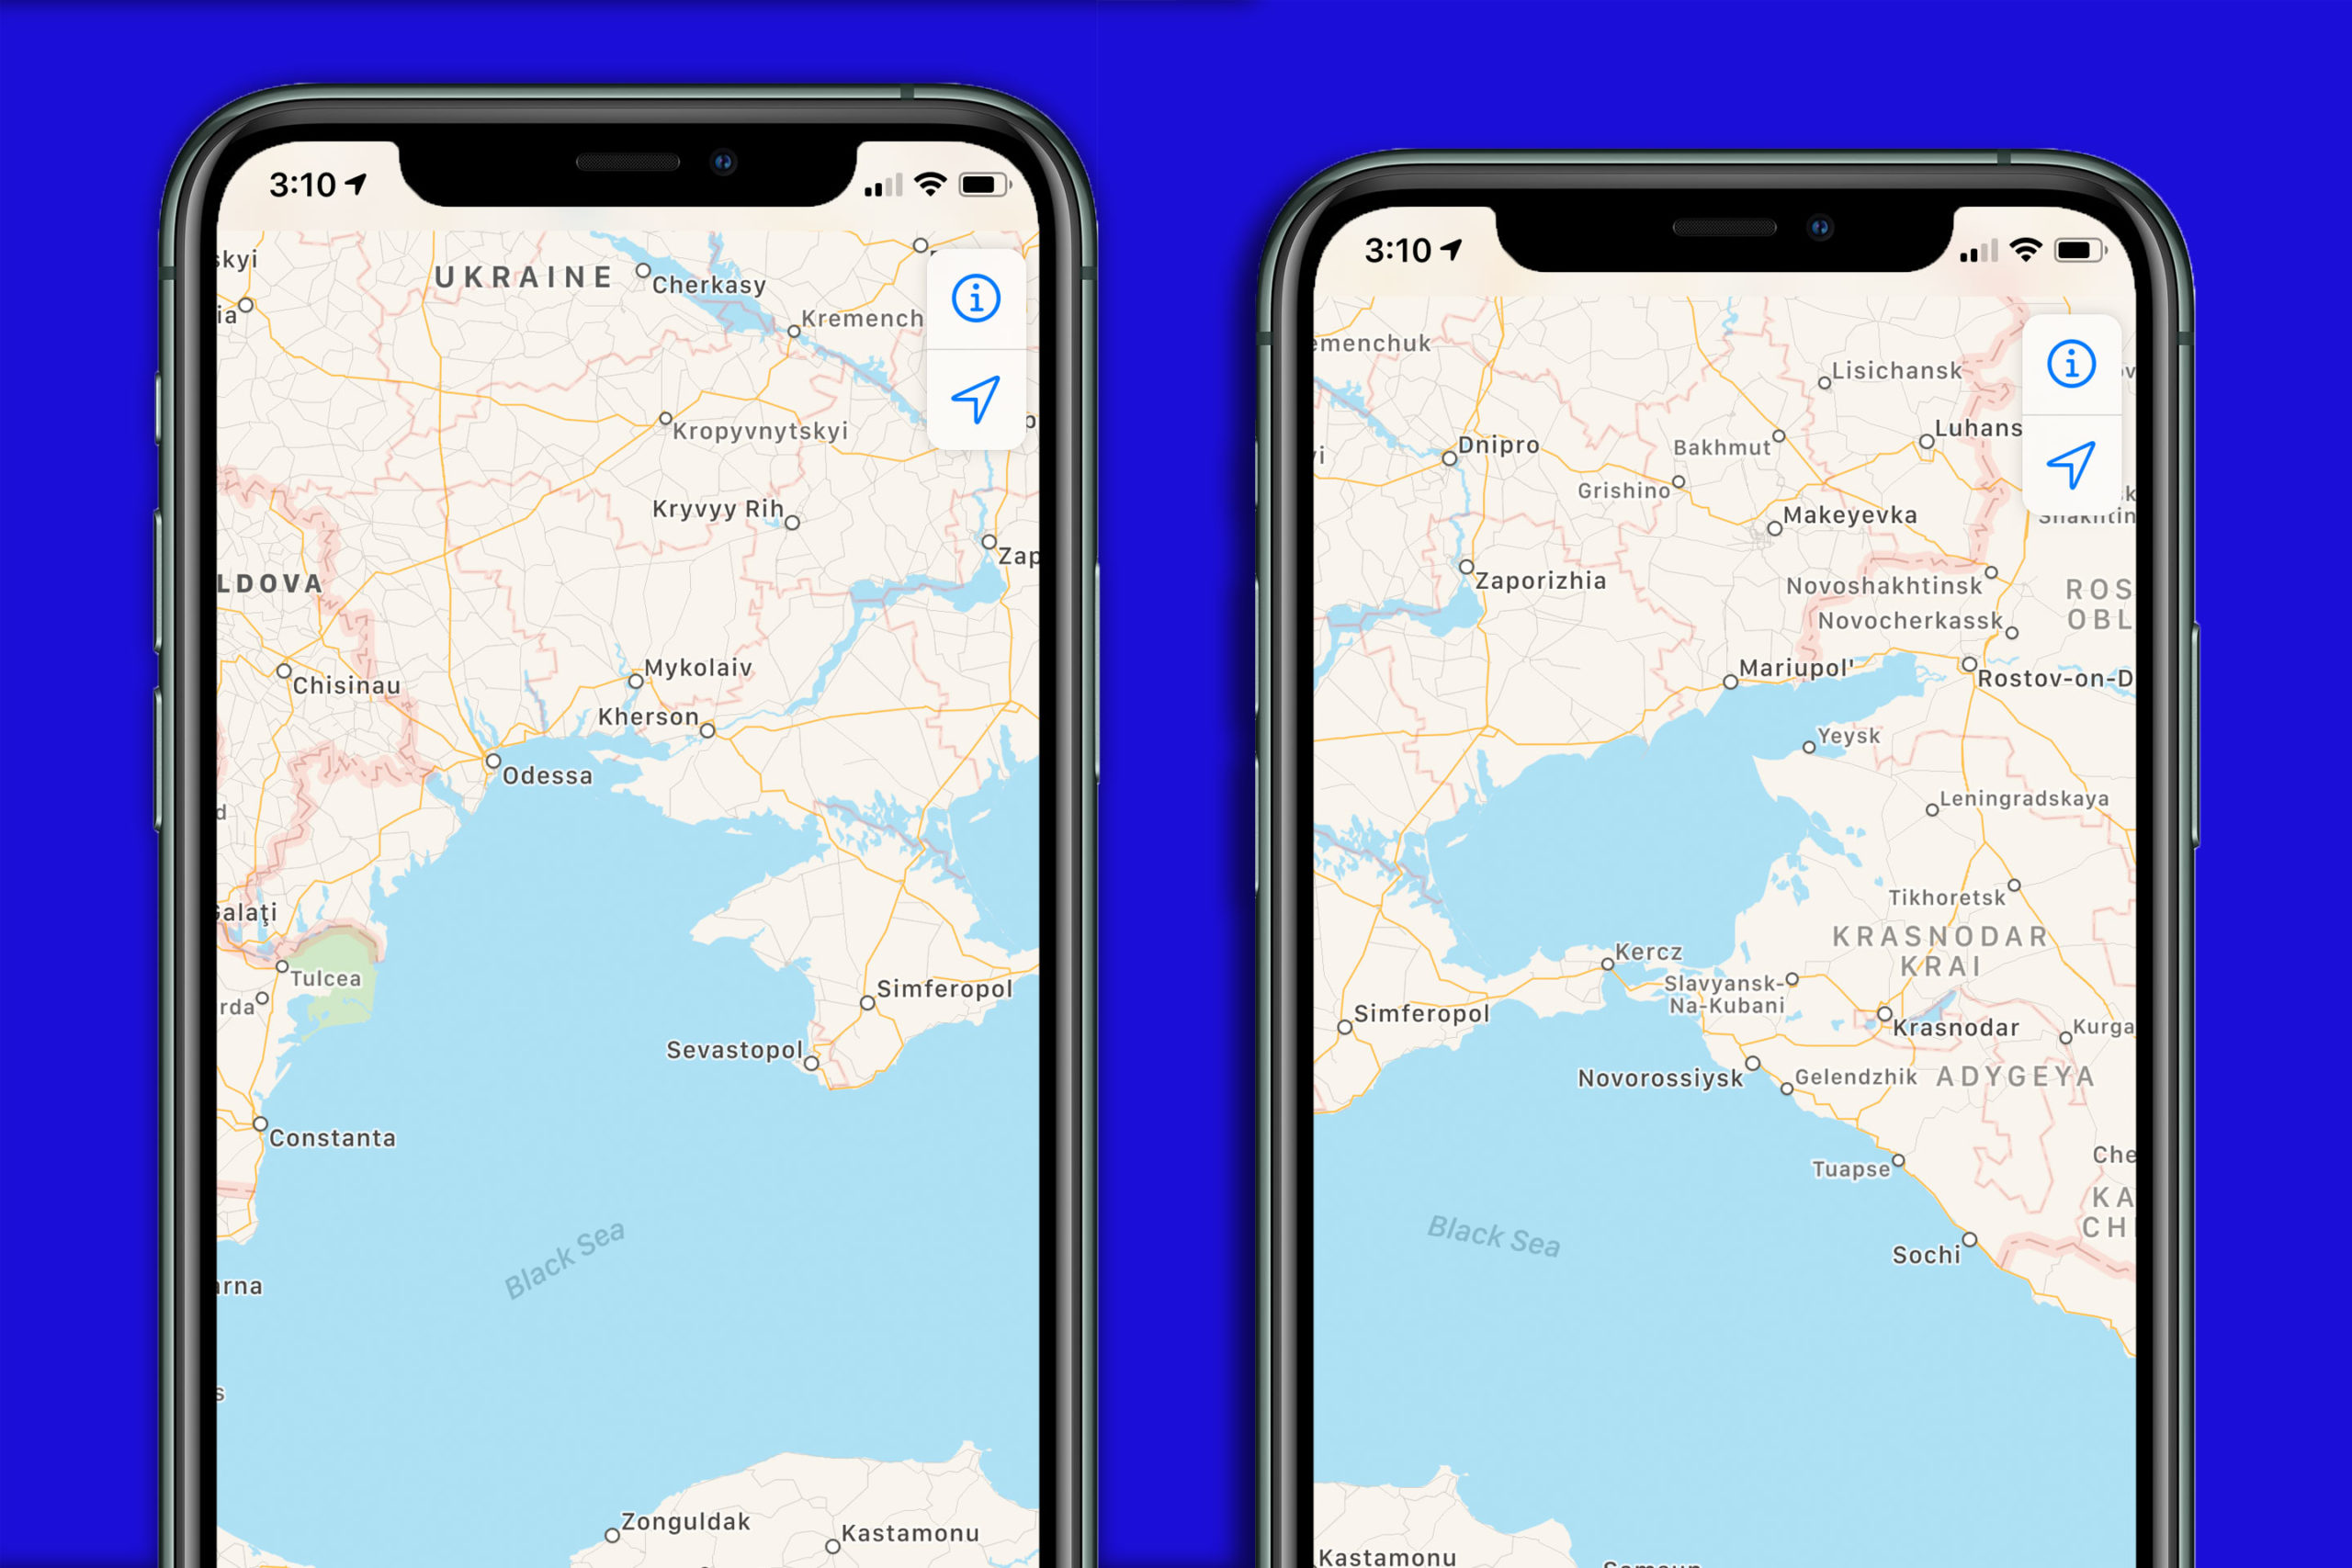 Apple will reevaluate changes to its Maps after situation in Crimea